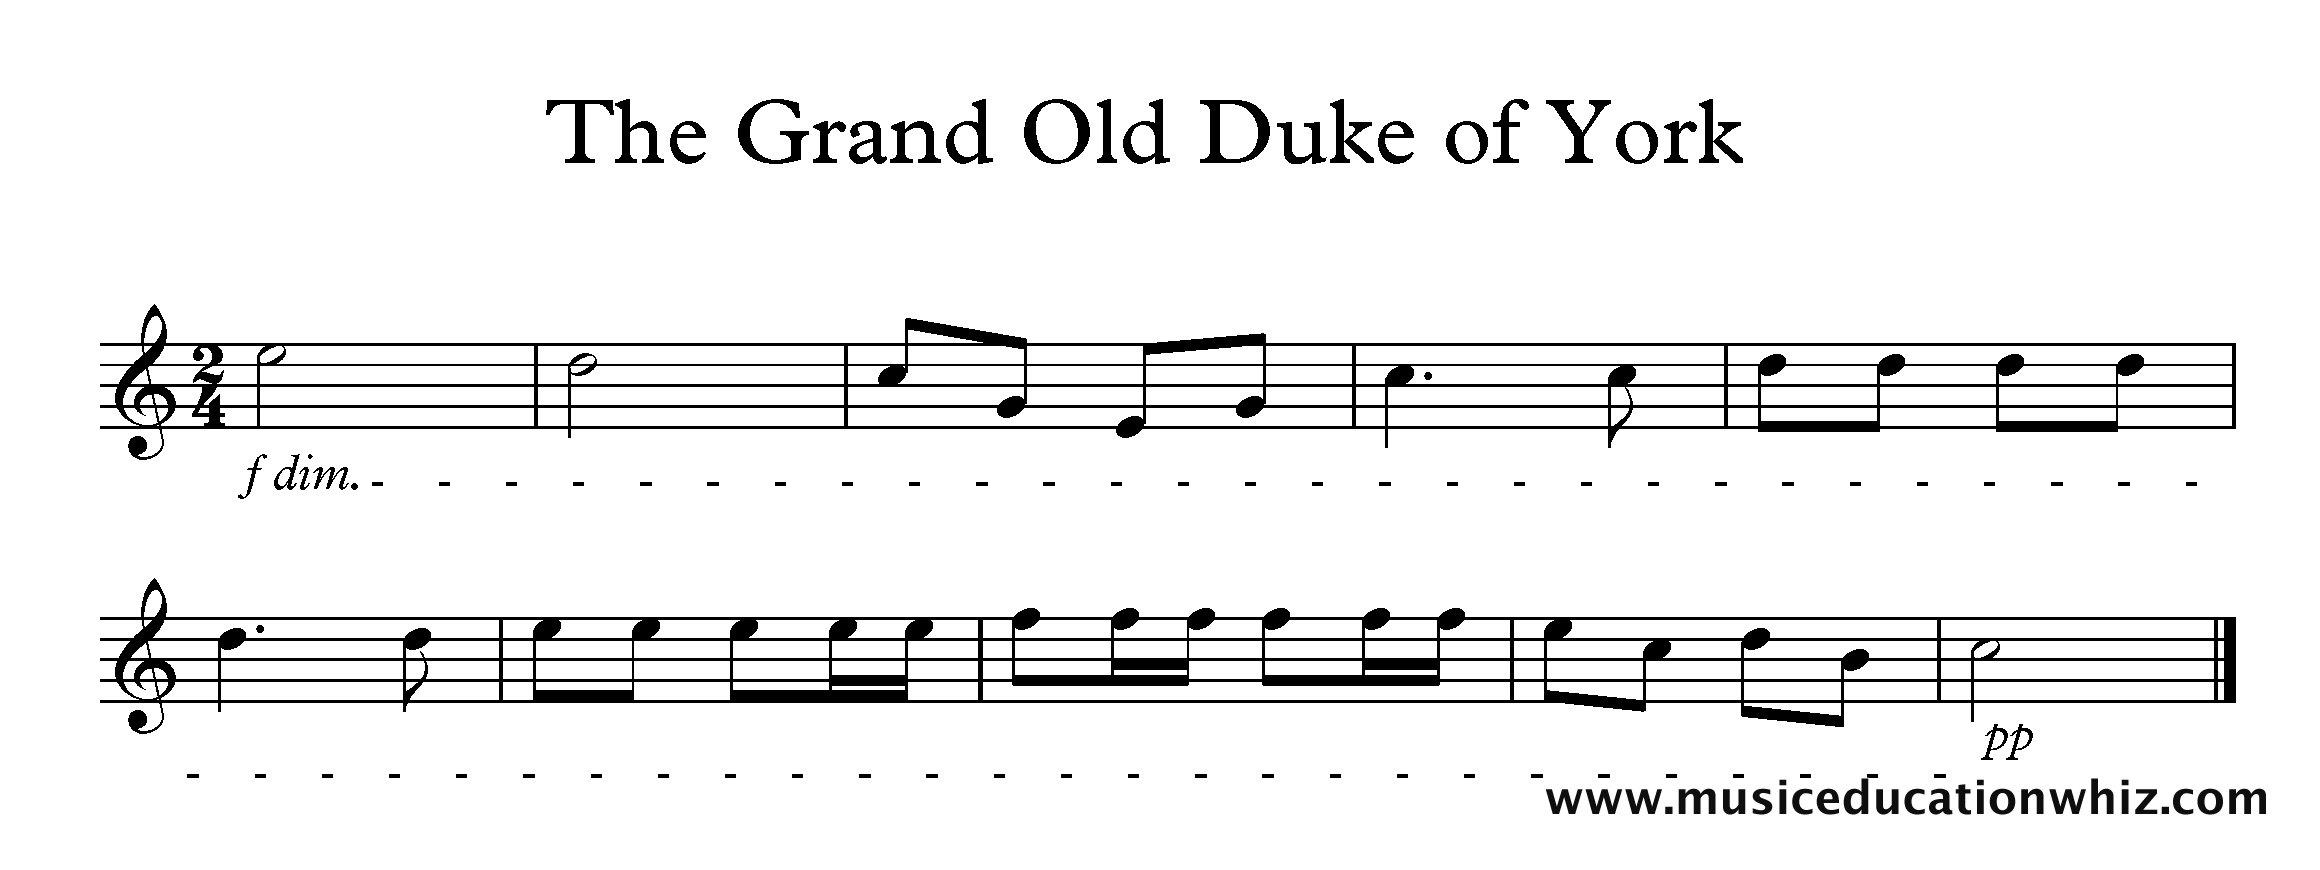 The Grand Old Duke of York melody starting f followed by a dim. followed by a dashed line to a pp at the end.